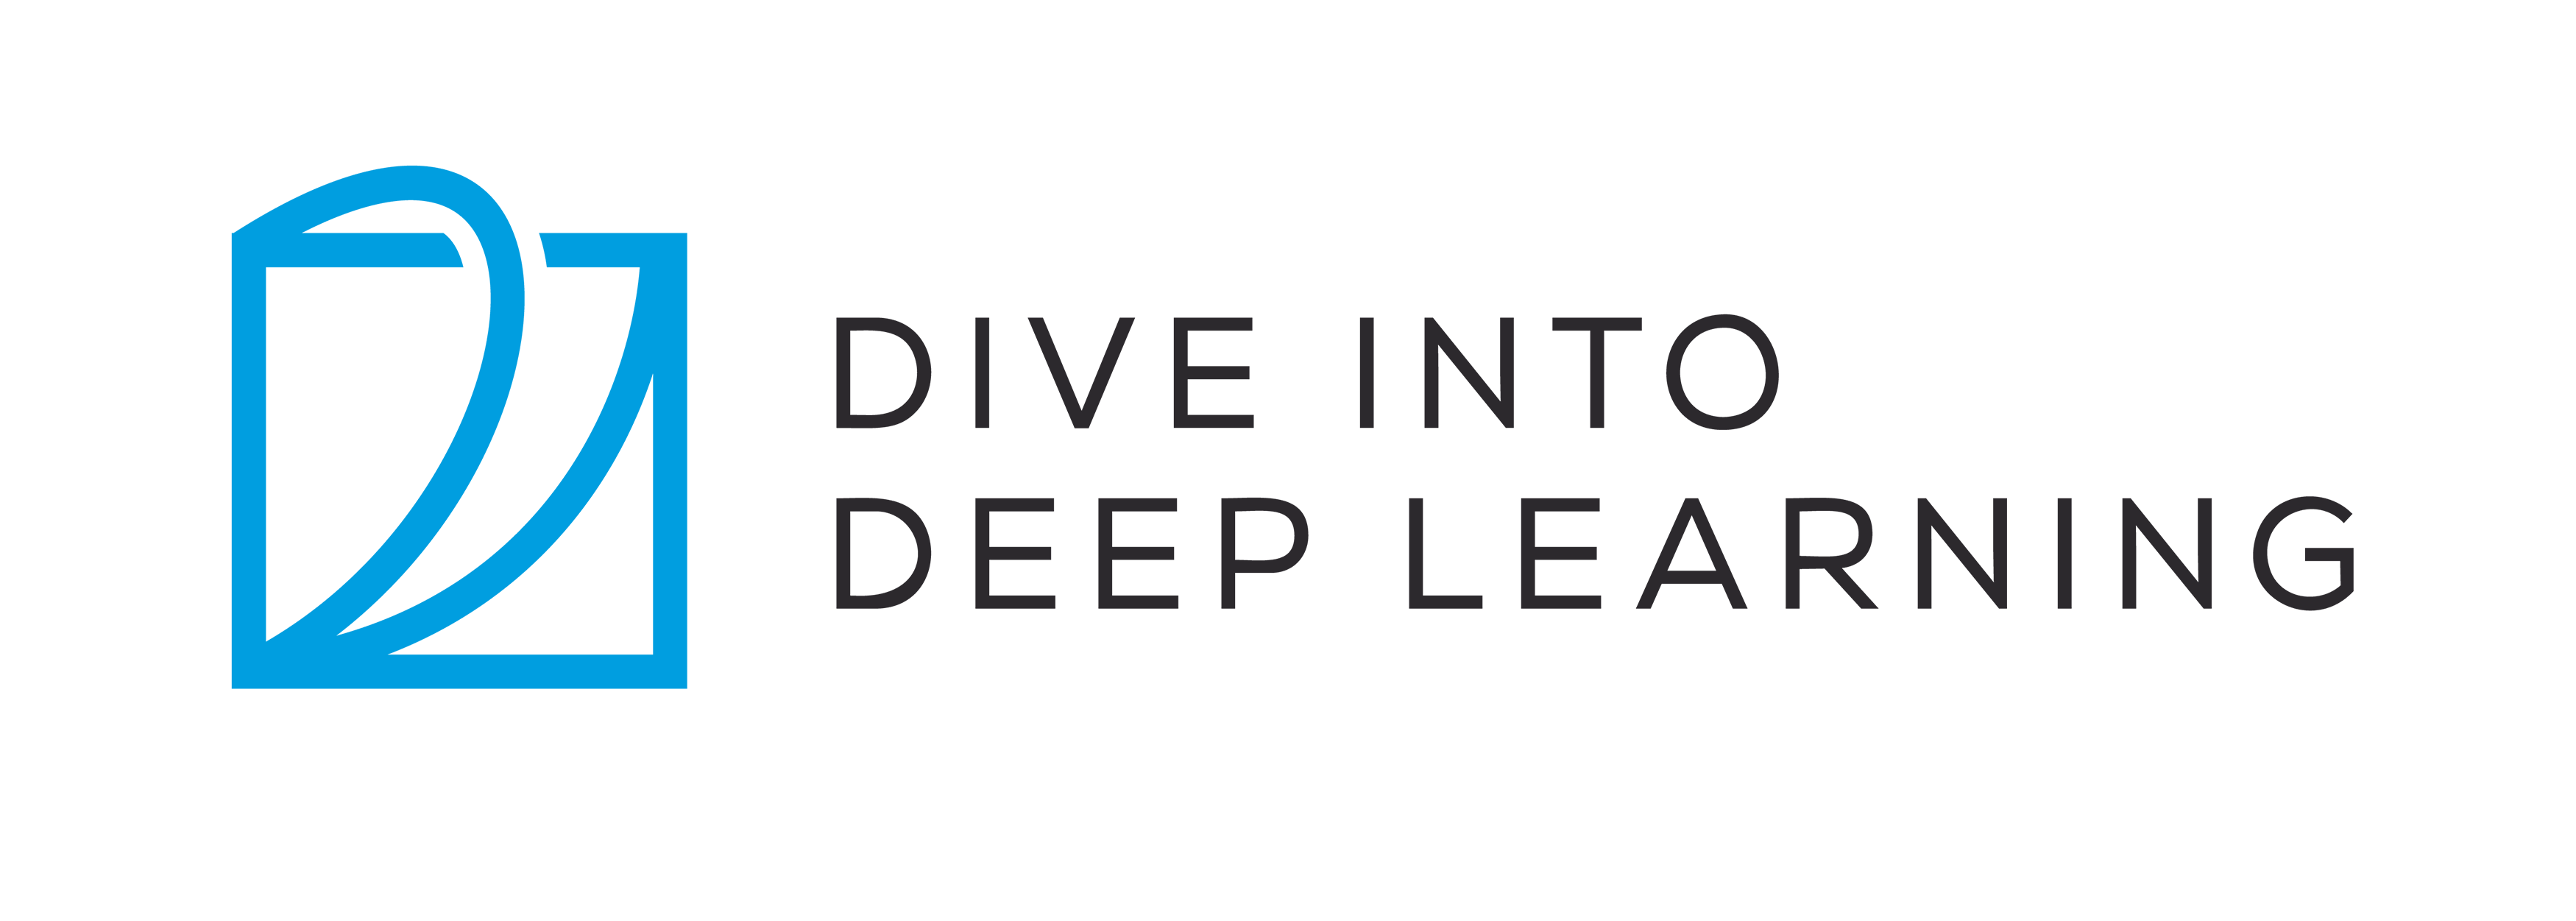 GitHub - d2l-ai/d2l-en: Interactive deep learning book with multi-framework  code, math, and discussions. Adopted at 400 universities from 60 countries  including Stanford, MIT, Harvard, and Cambridge.